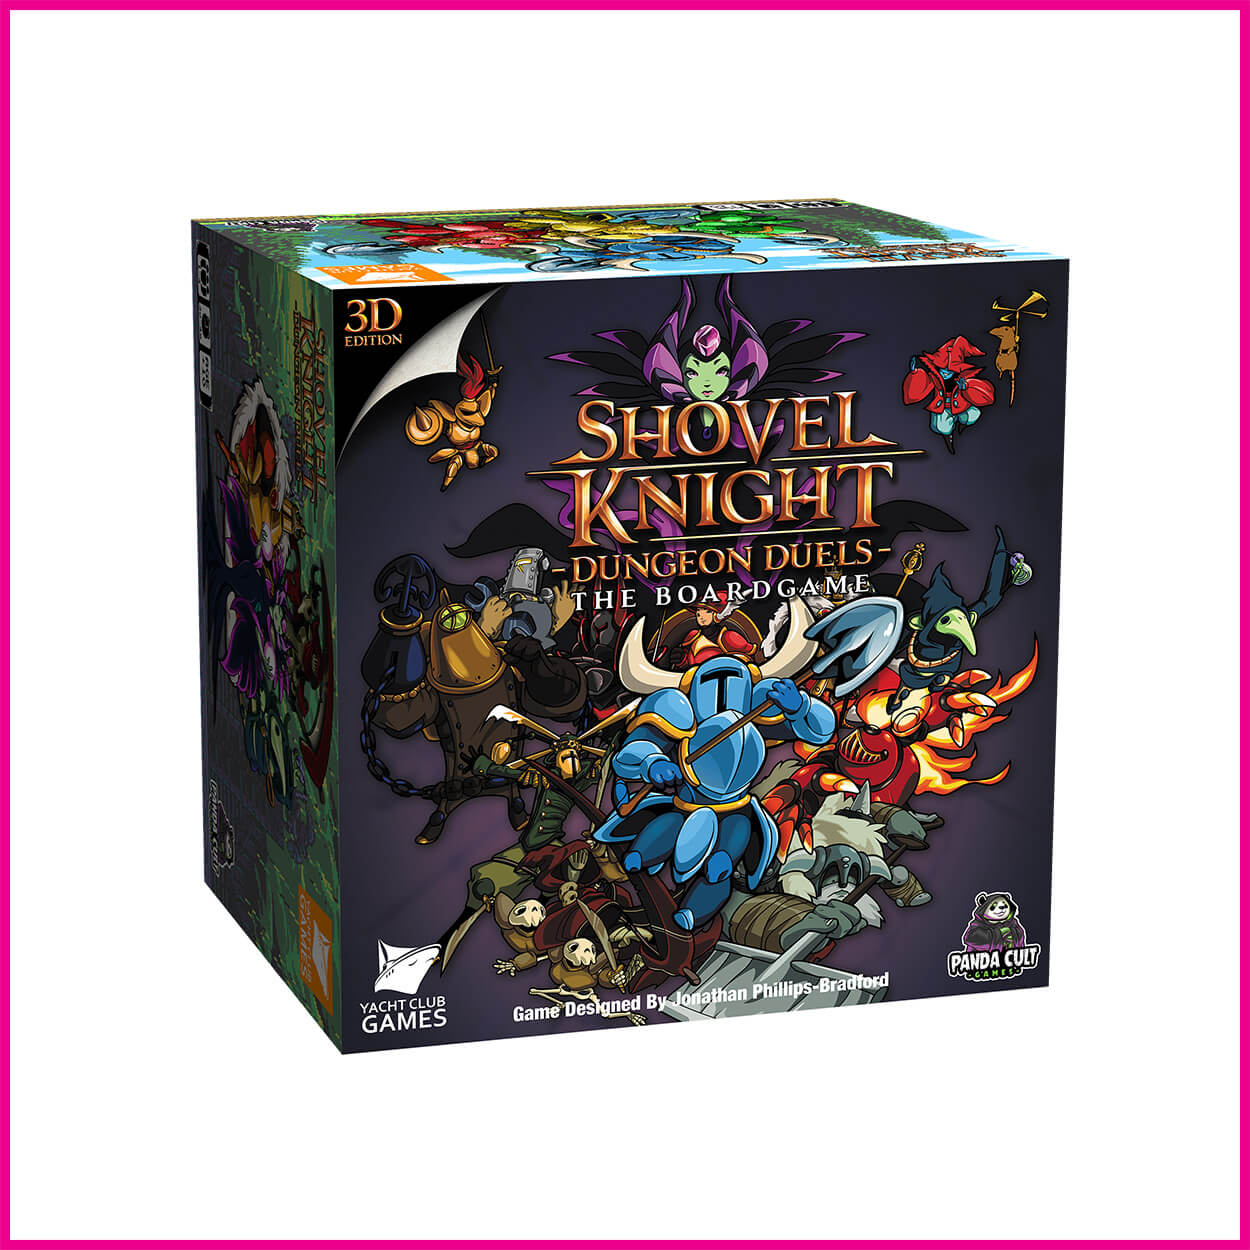 Shovel Knight Dungeon Duels 3D Board Game